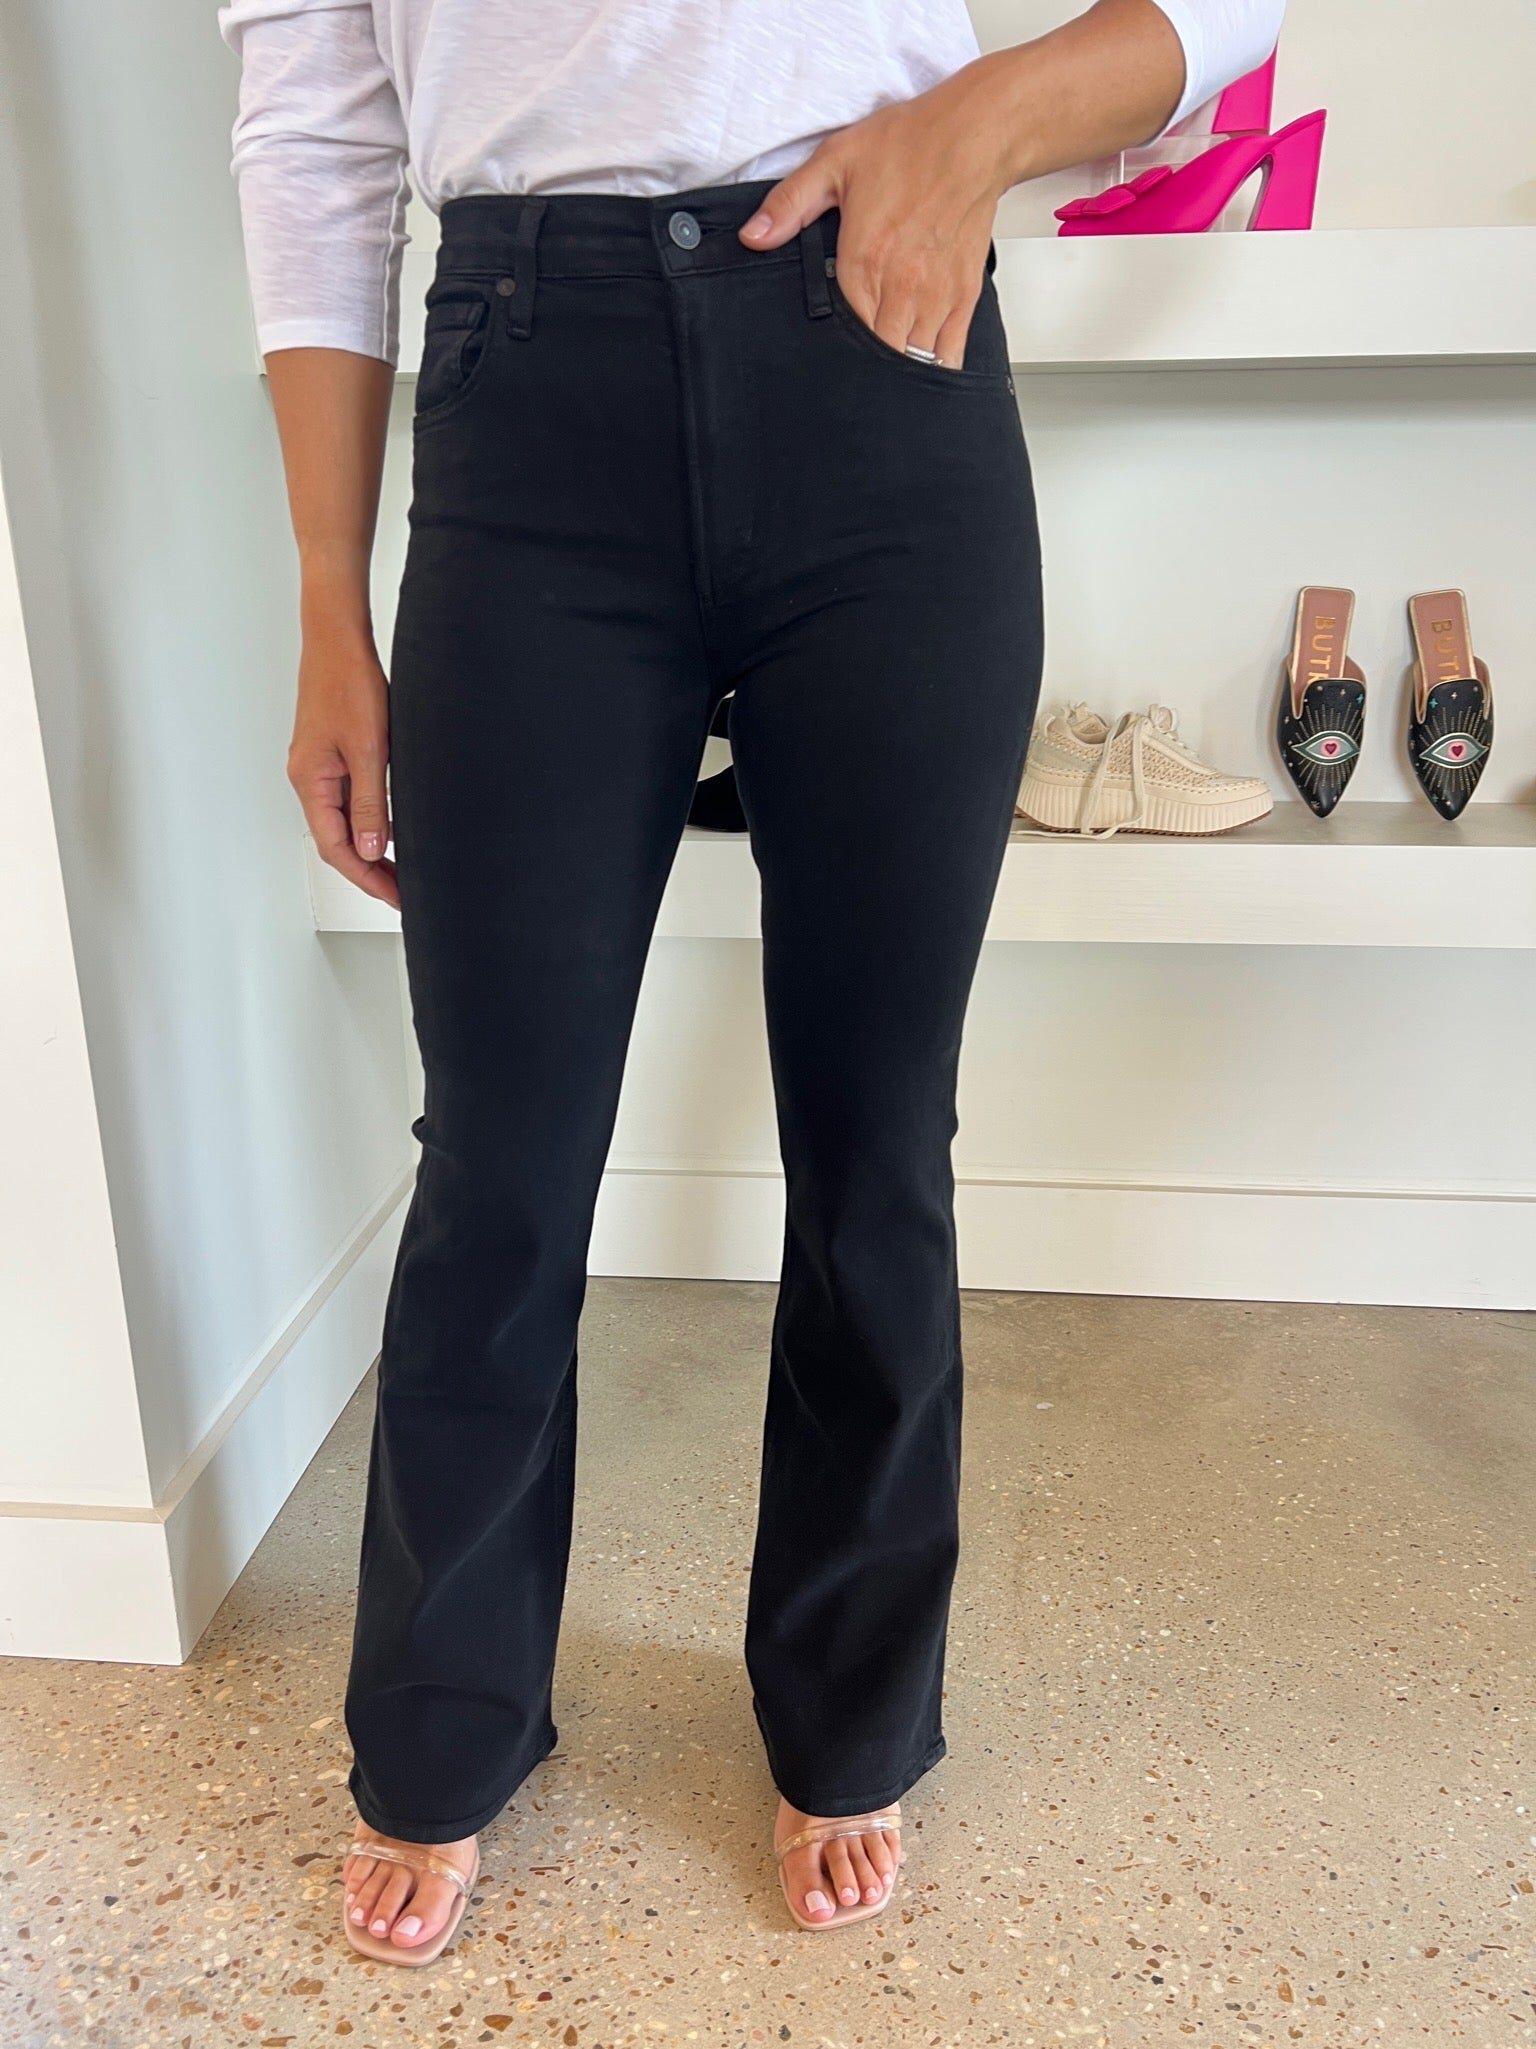 Citizens of Humanity Plush Black Isola Flare - Stylish and comfortable black jeans with a flattering flare leg design and a 32-inch inseam, perfect for versatile and fashionable outfit choices.